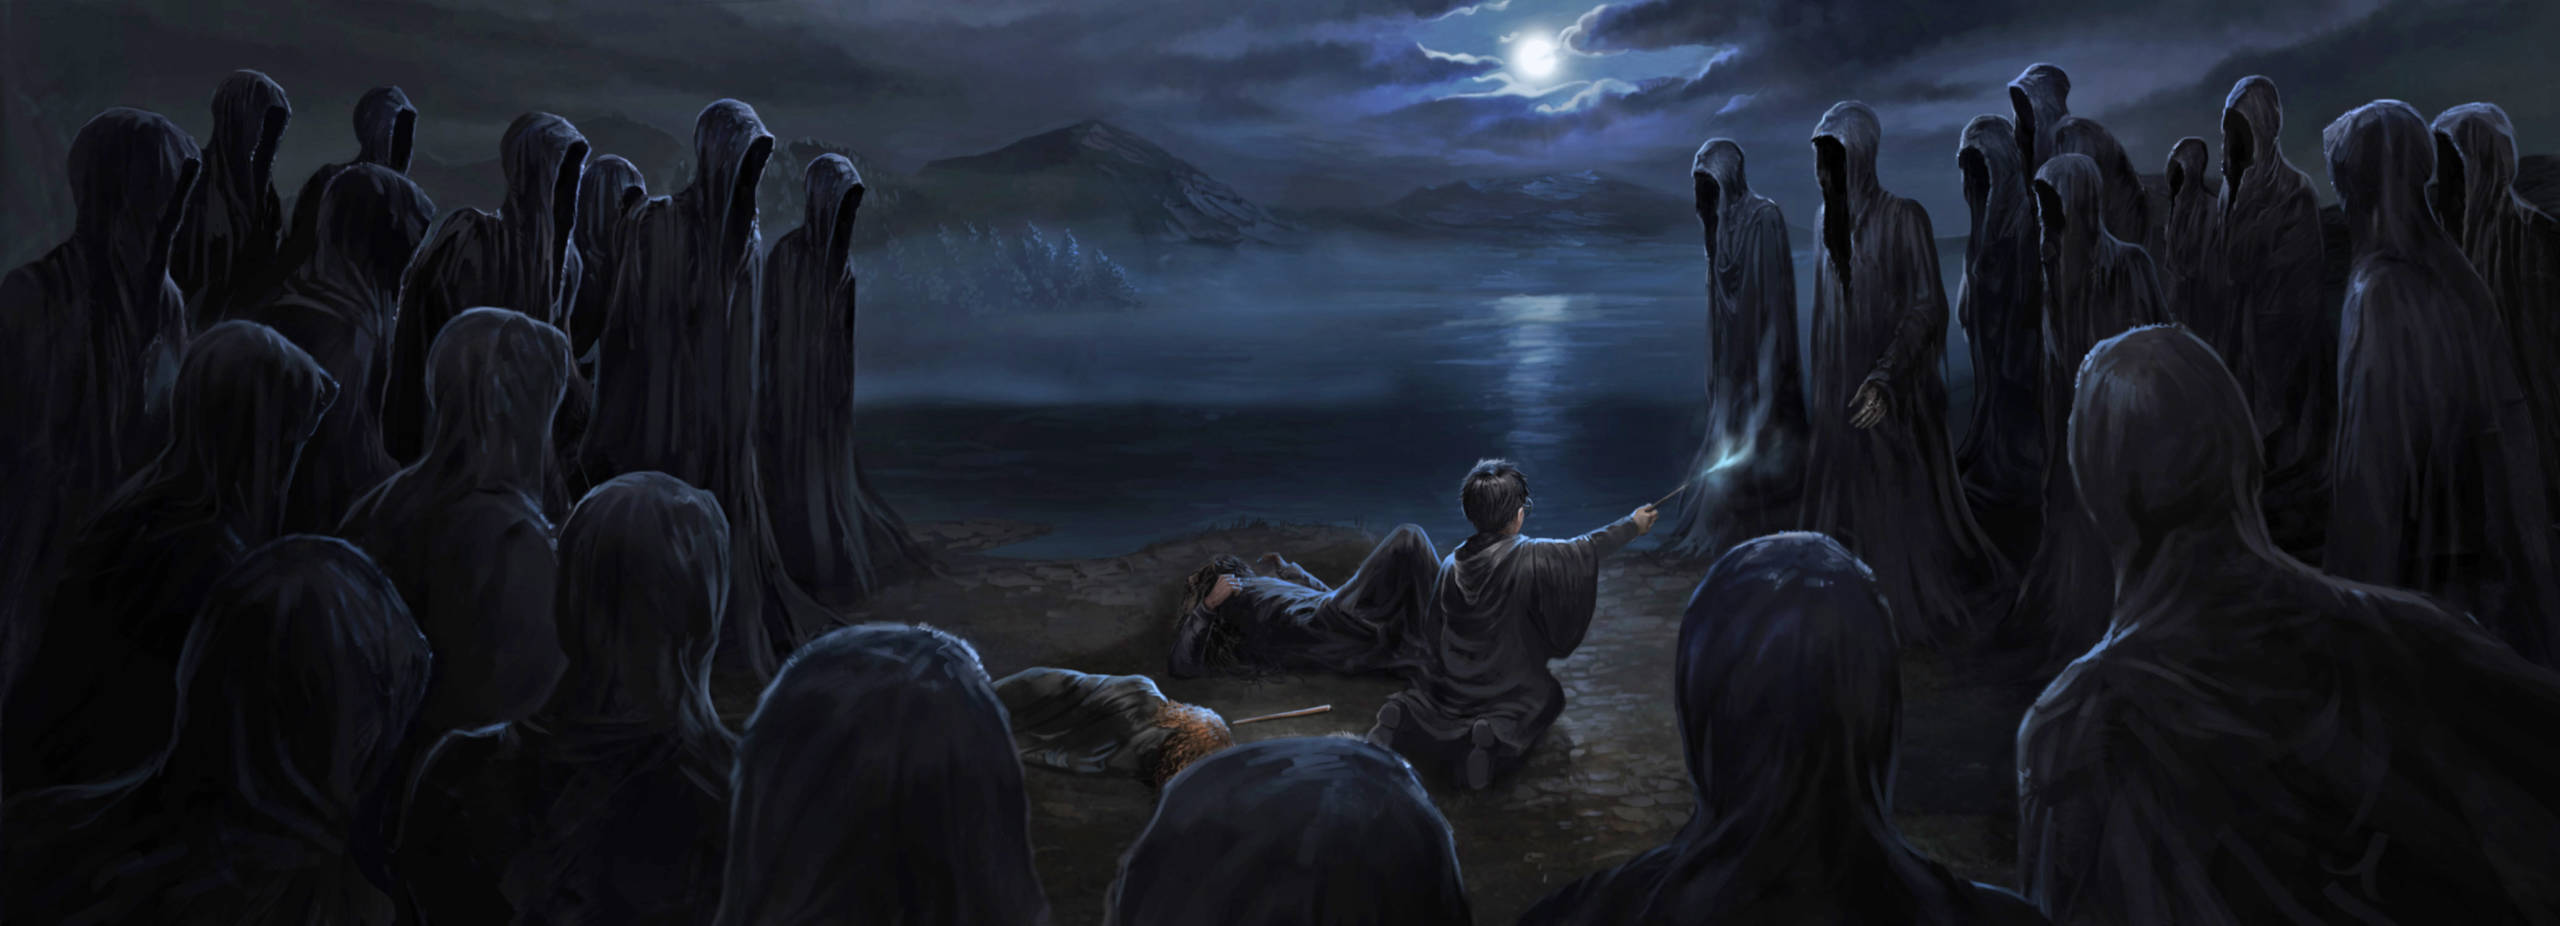 Harry, Hermione and Sirius are overwhelmed by a swarm of Dementors by the lake.